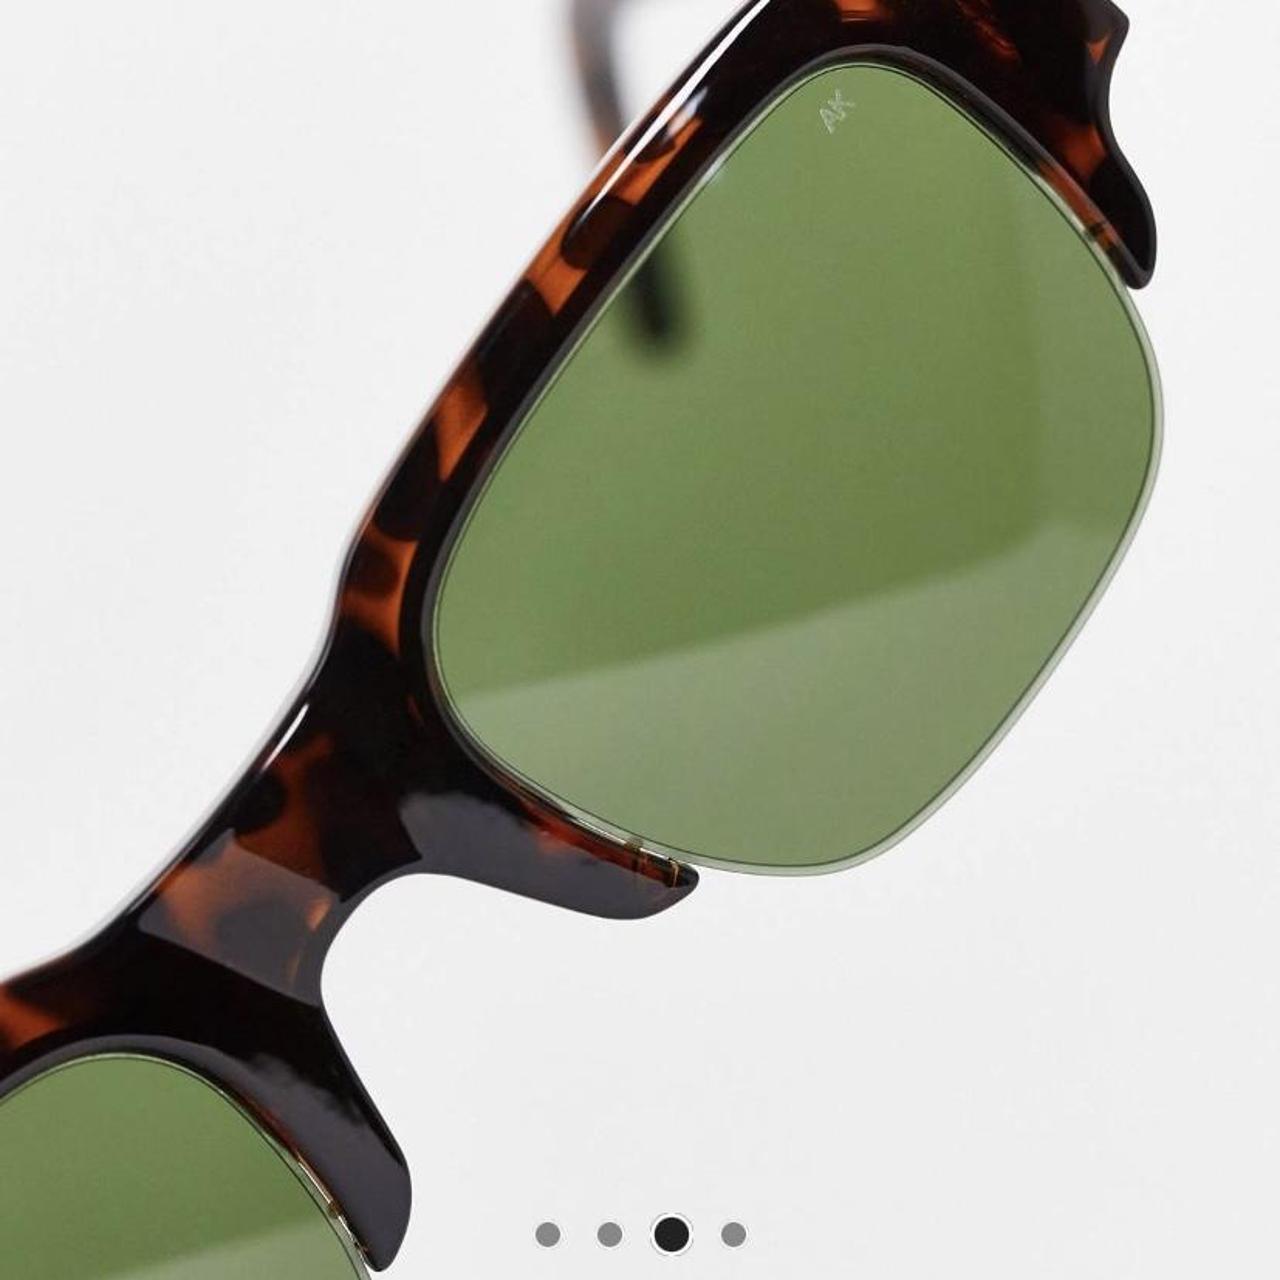 Product Image 2 - Sunglasses by A.kjaerbede
Serving real shade
Square